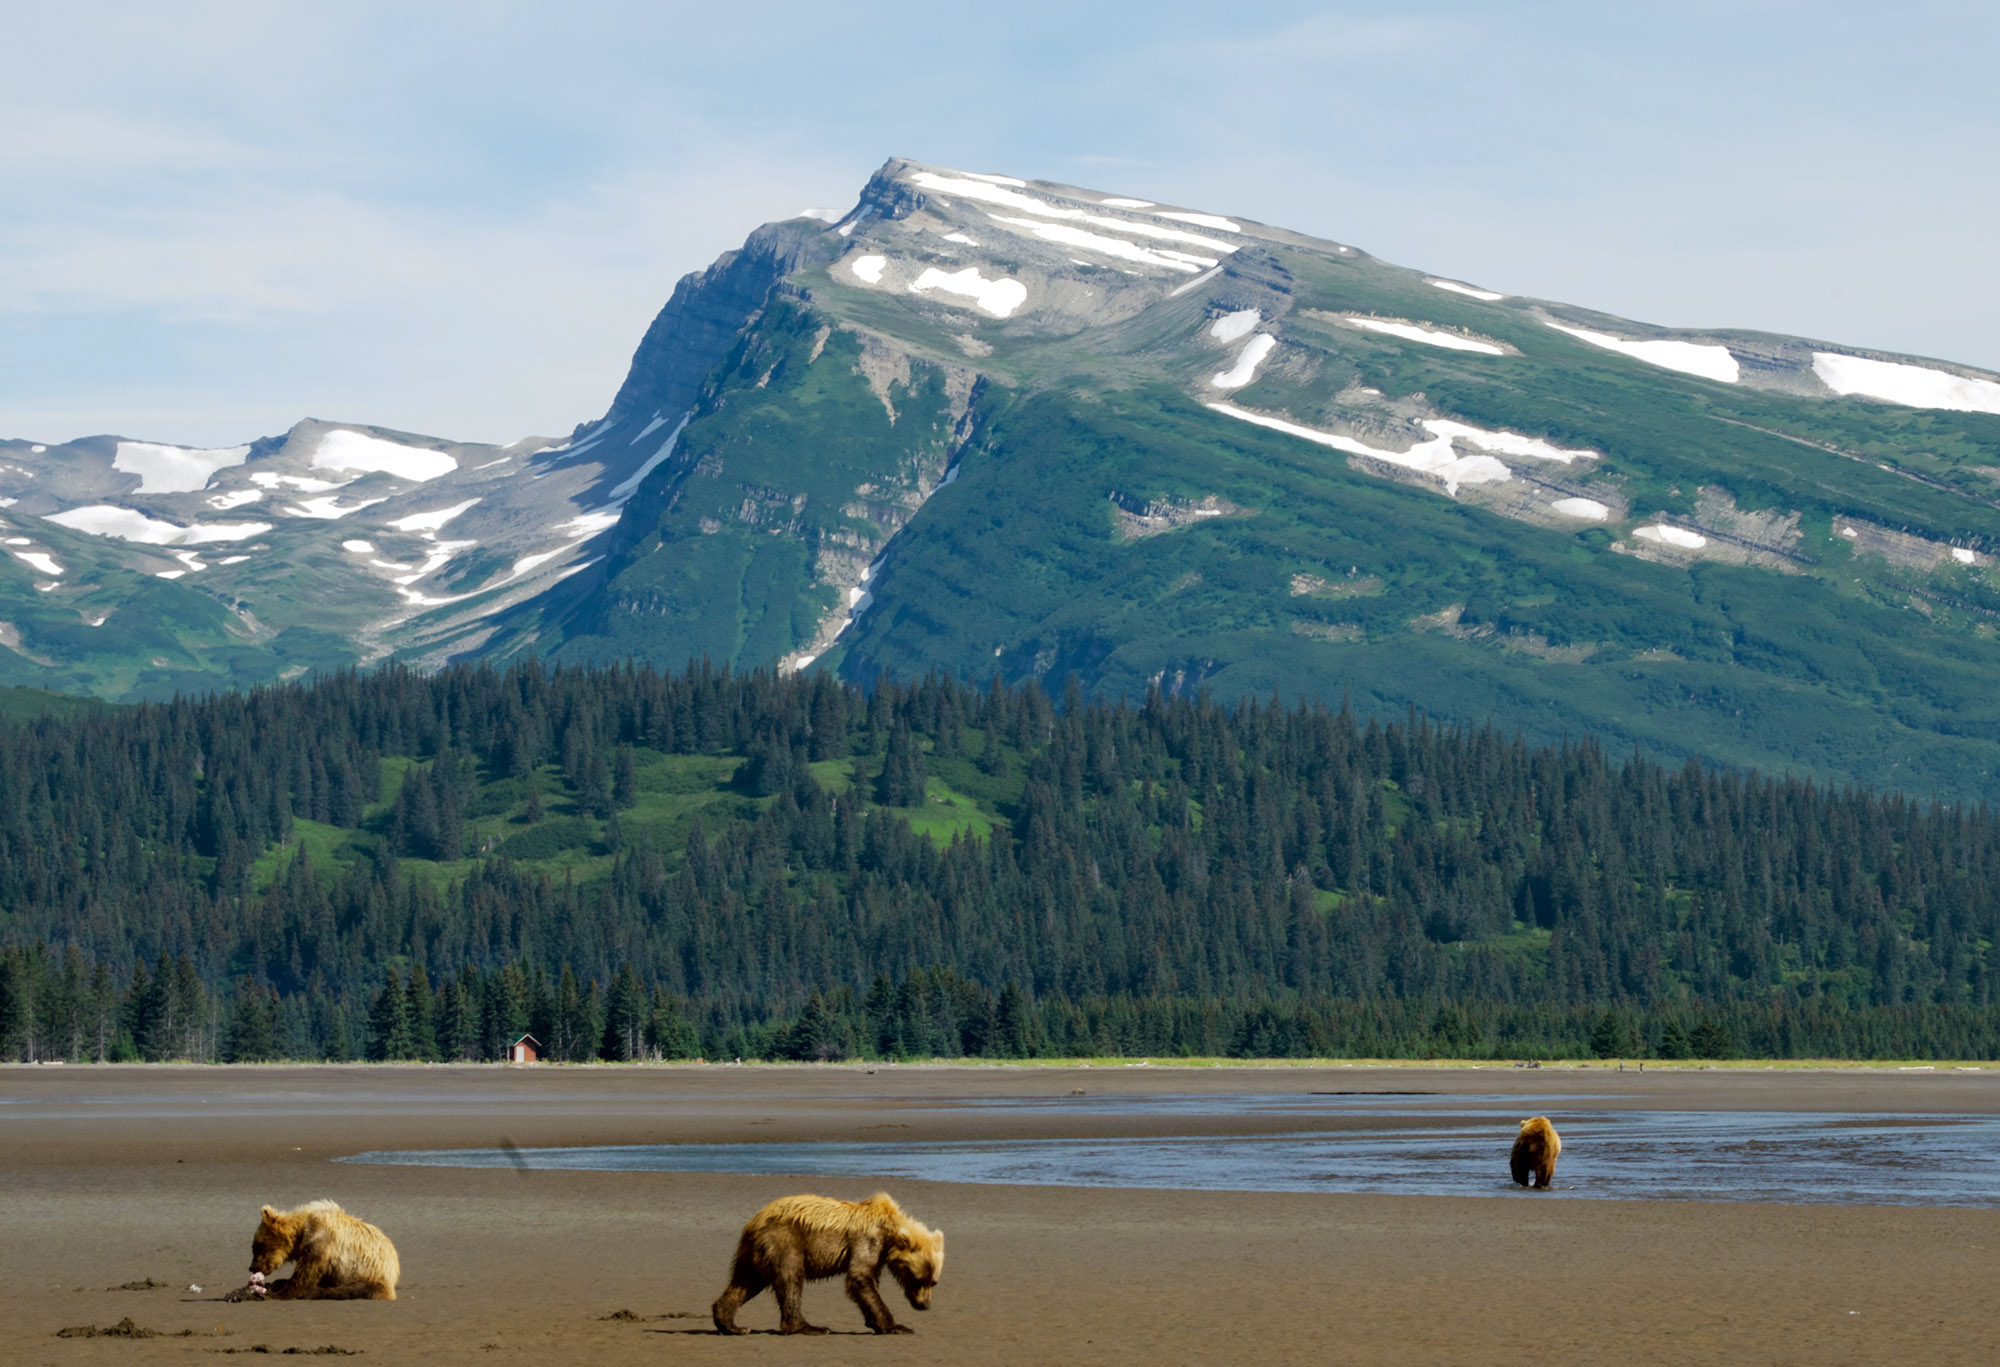 Three brown bears on a sandy bay in front of a forest and mountain range.